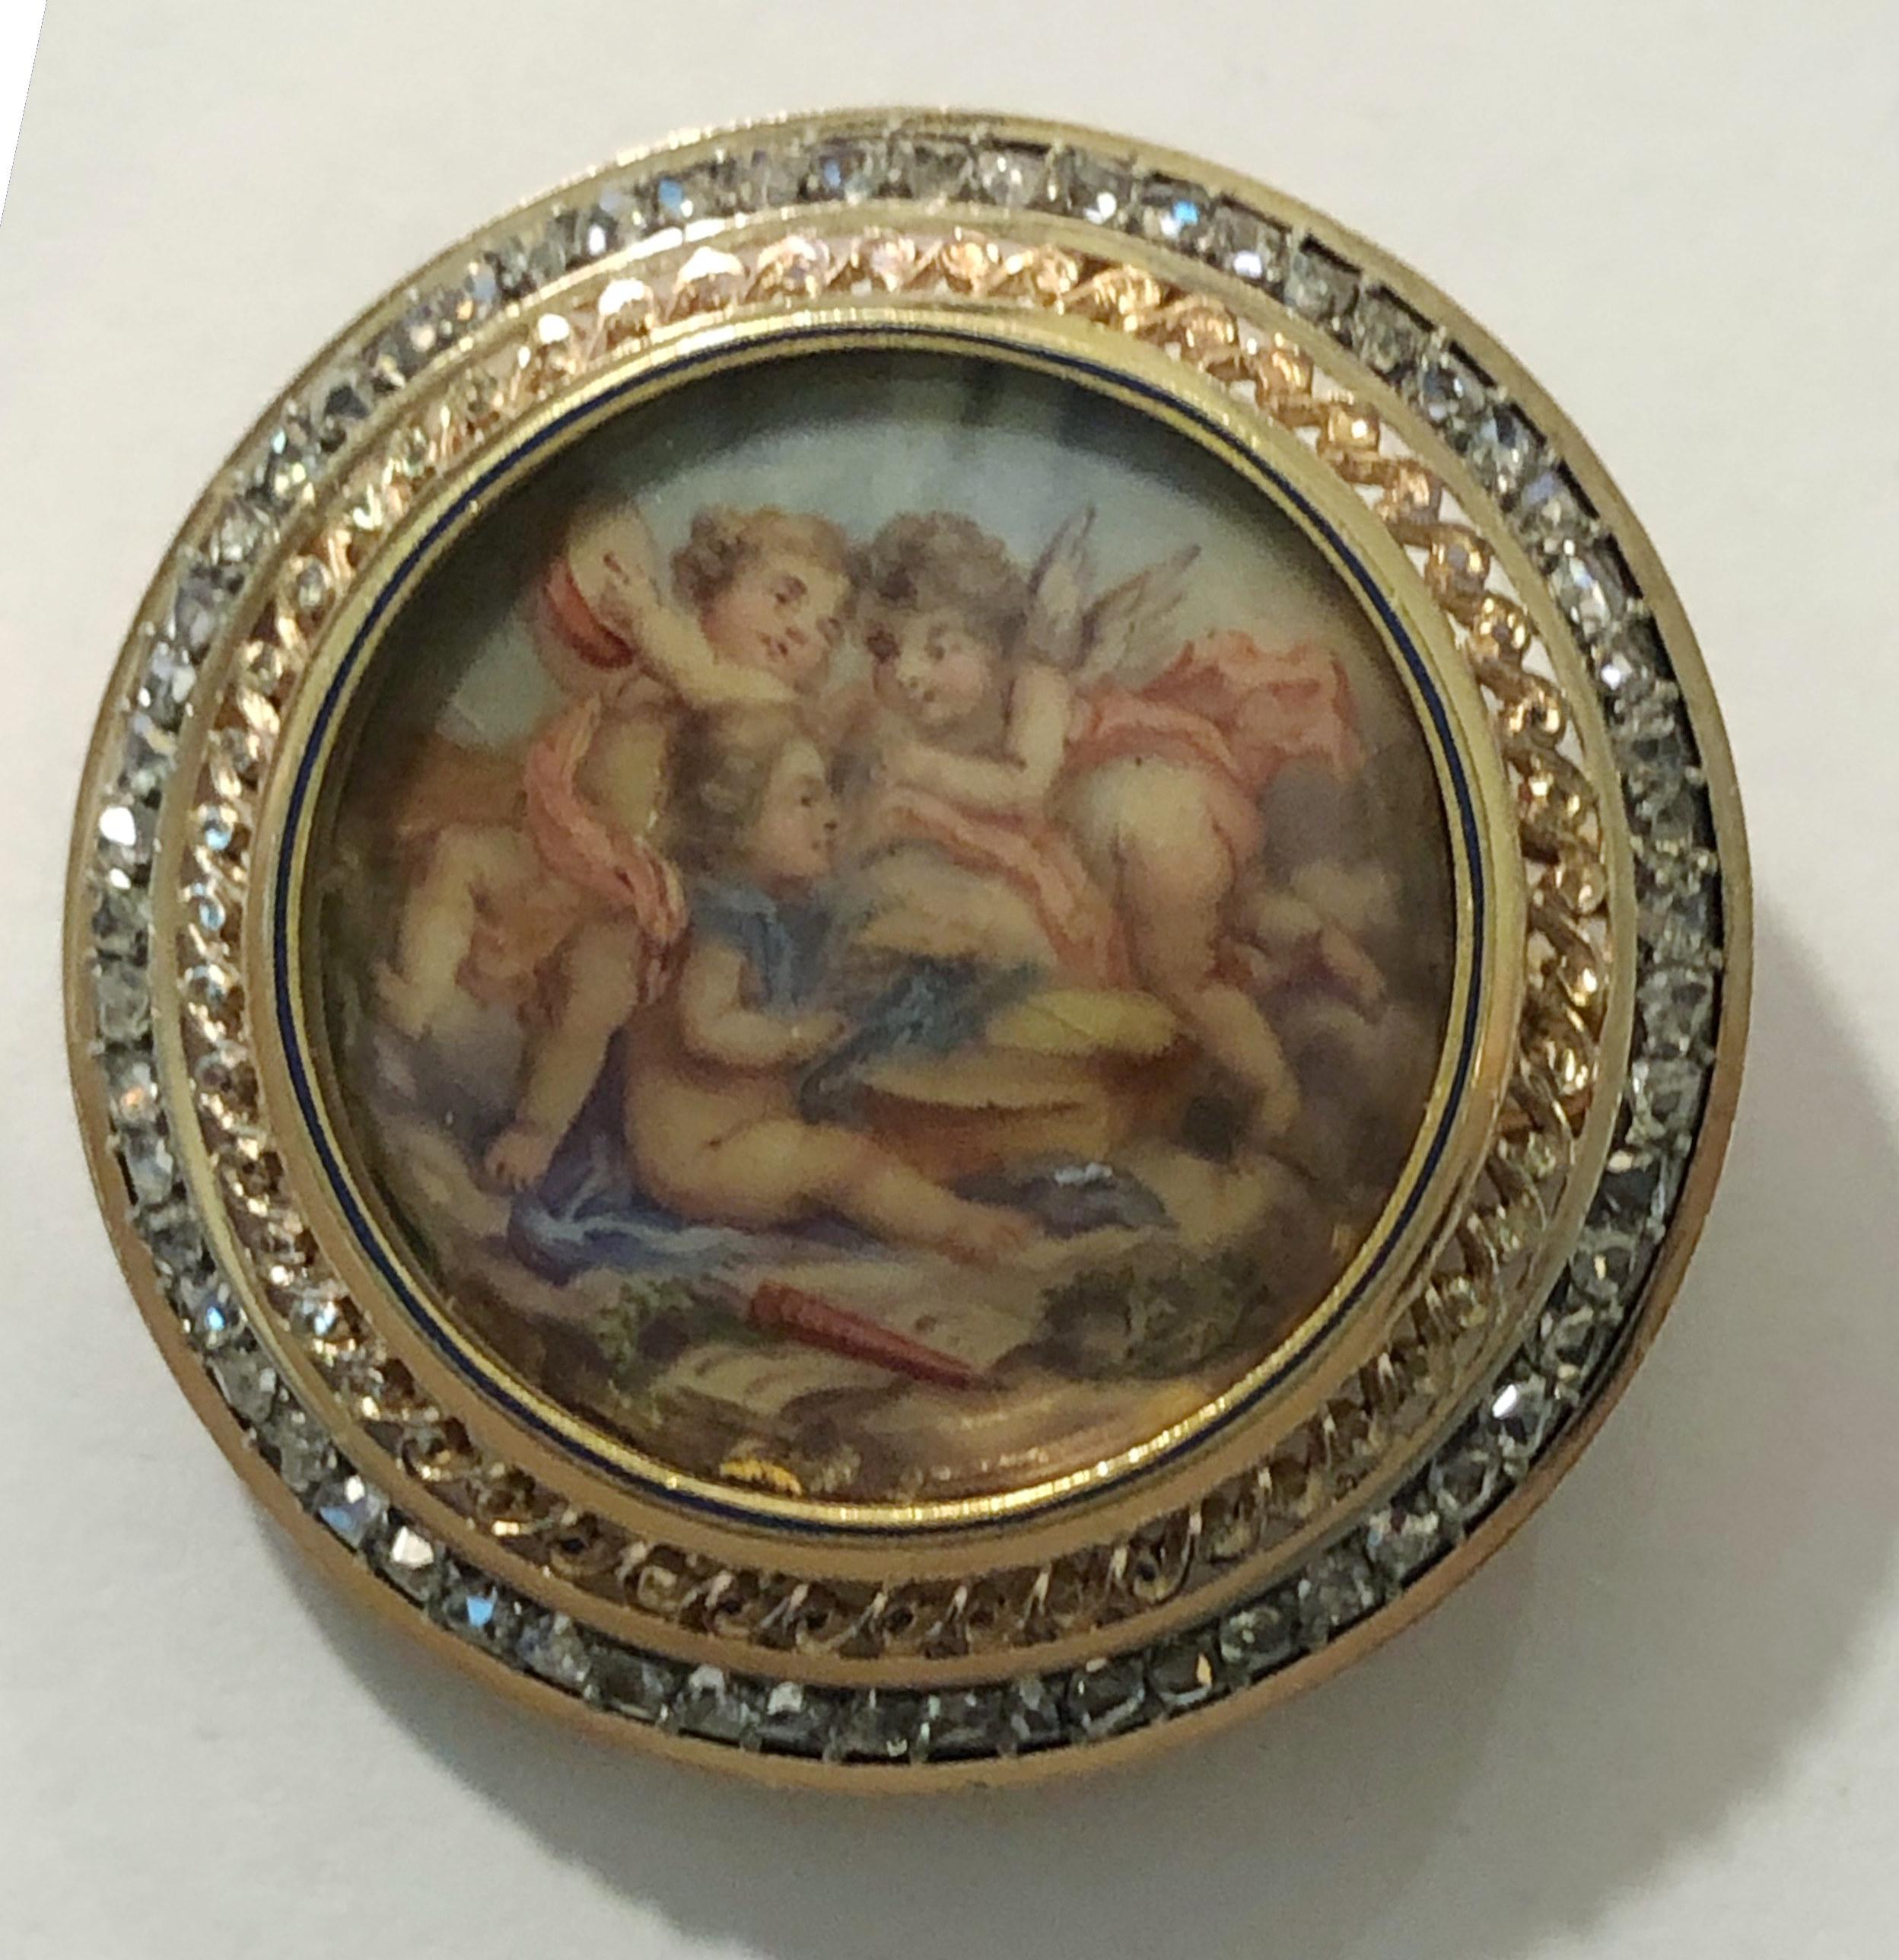 Vintage round photo holder brooch with miniatures of angels, and 18 karat gold and silver surrounded by diamonds, Italy 1920s-1930s 
Diameter 3.2cm